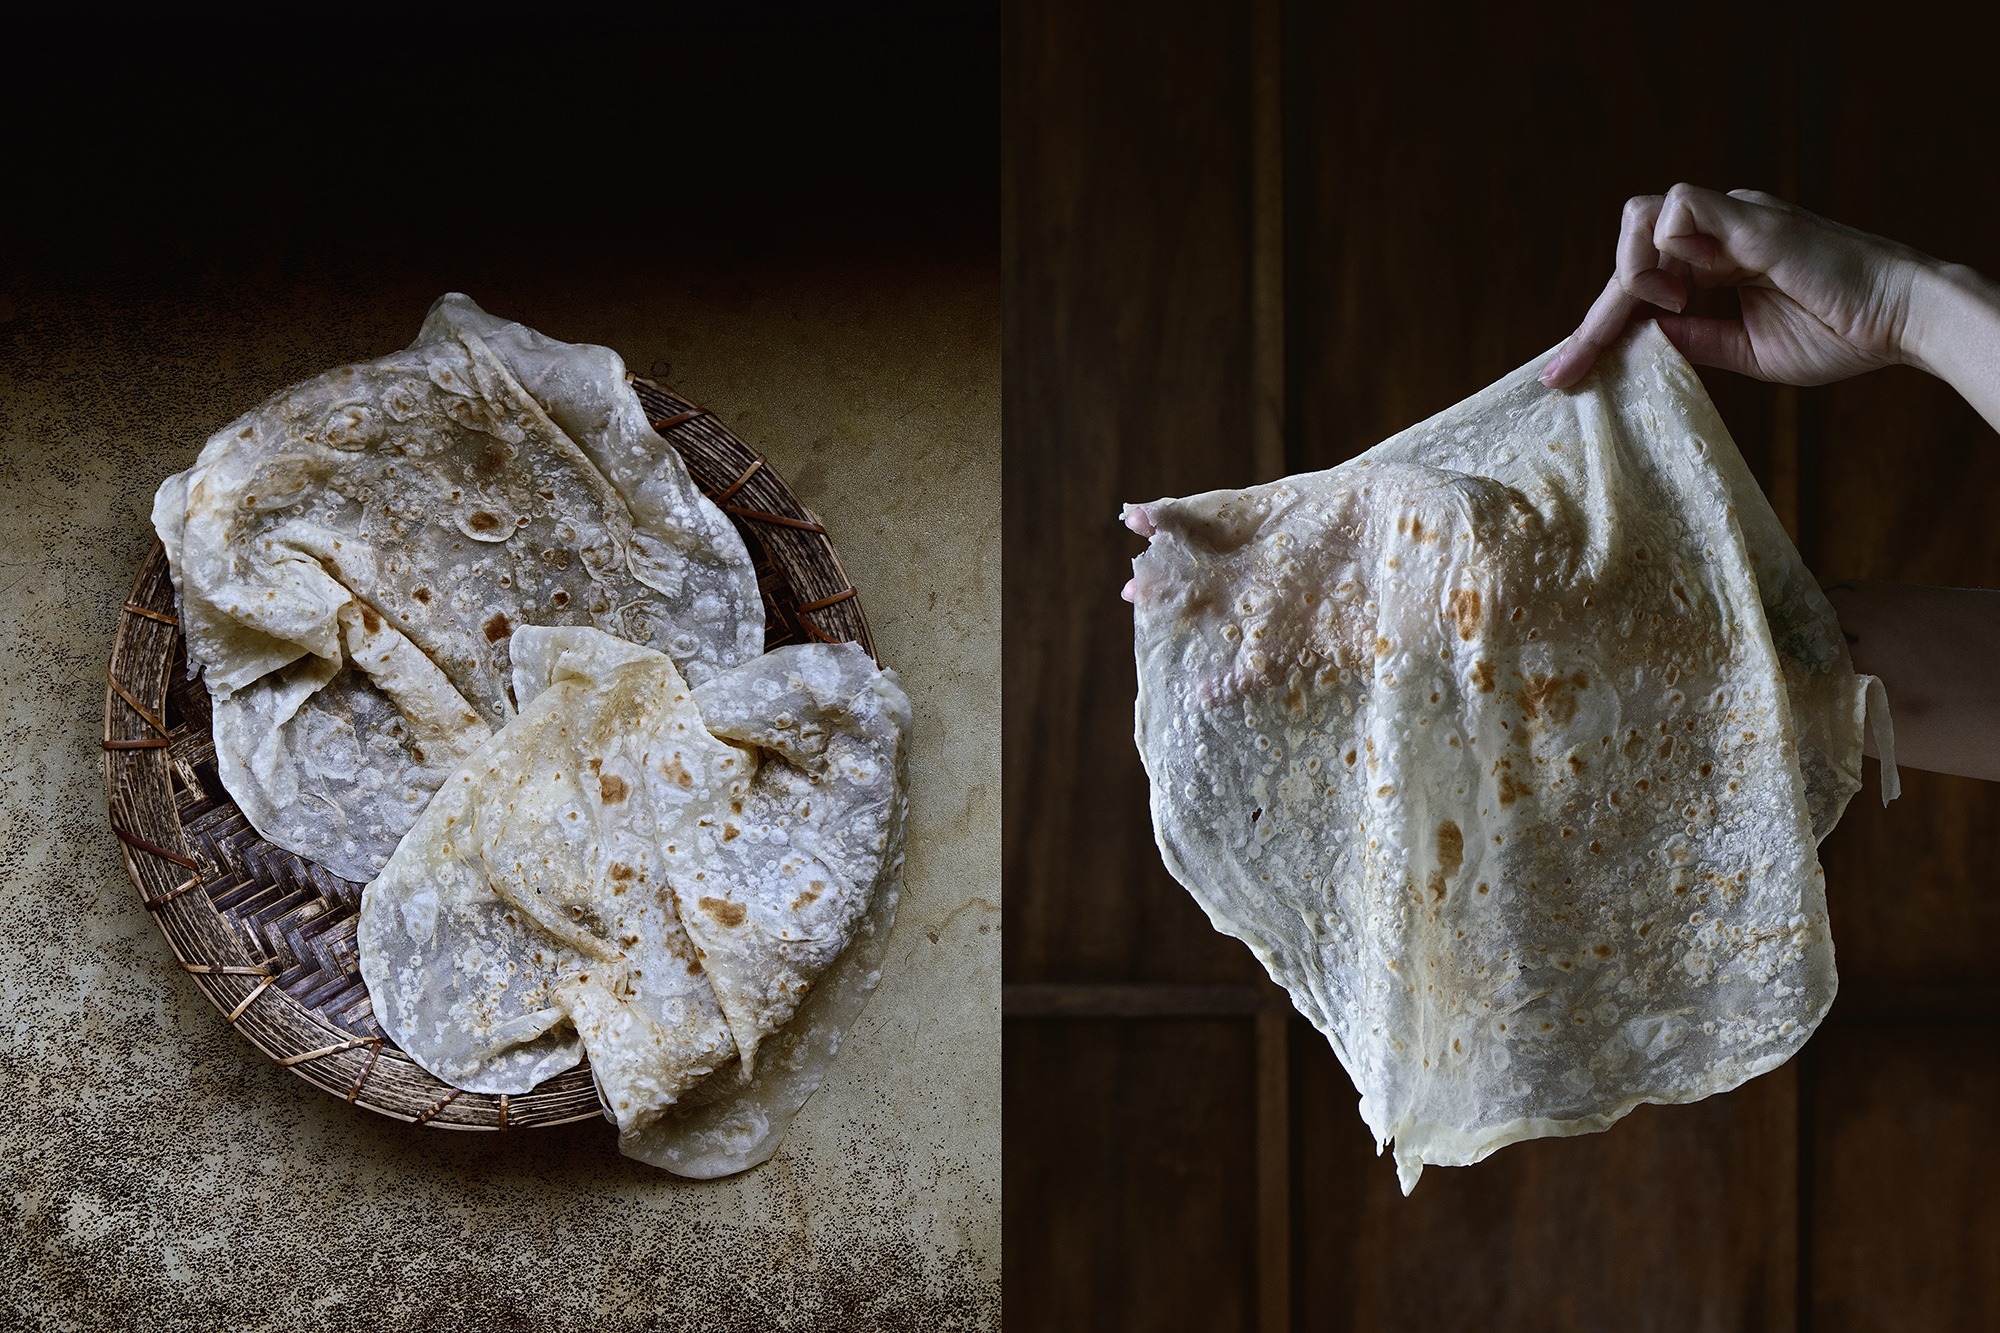 Paper thin soft chewy, Sonoran-style flour tortilla